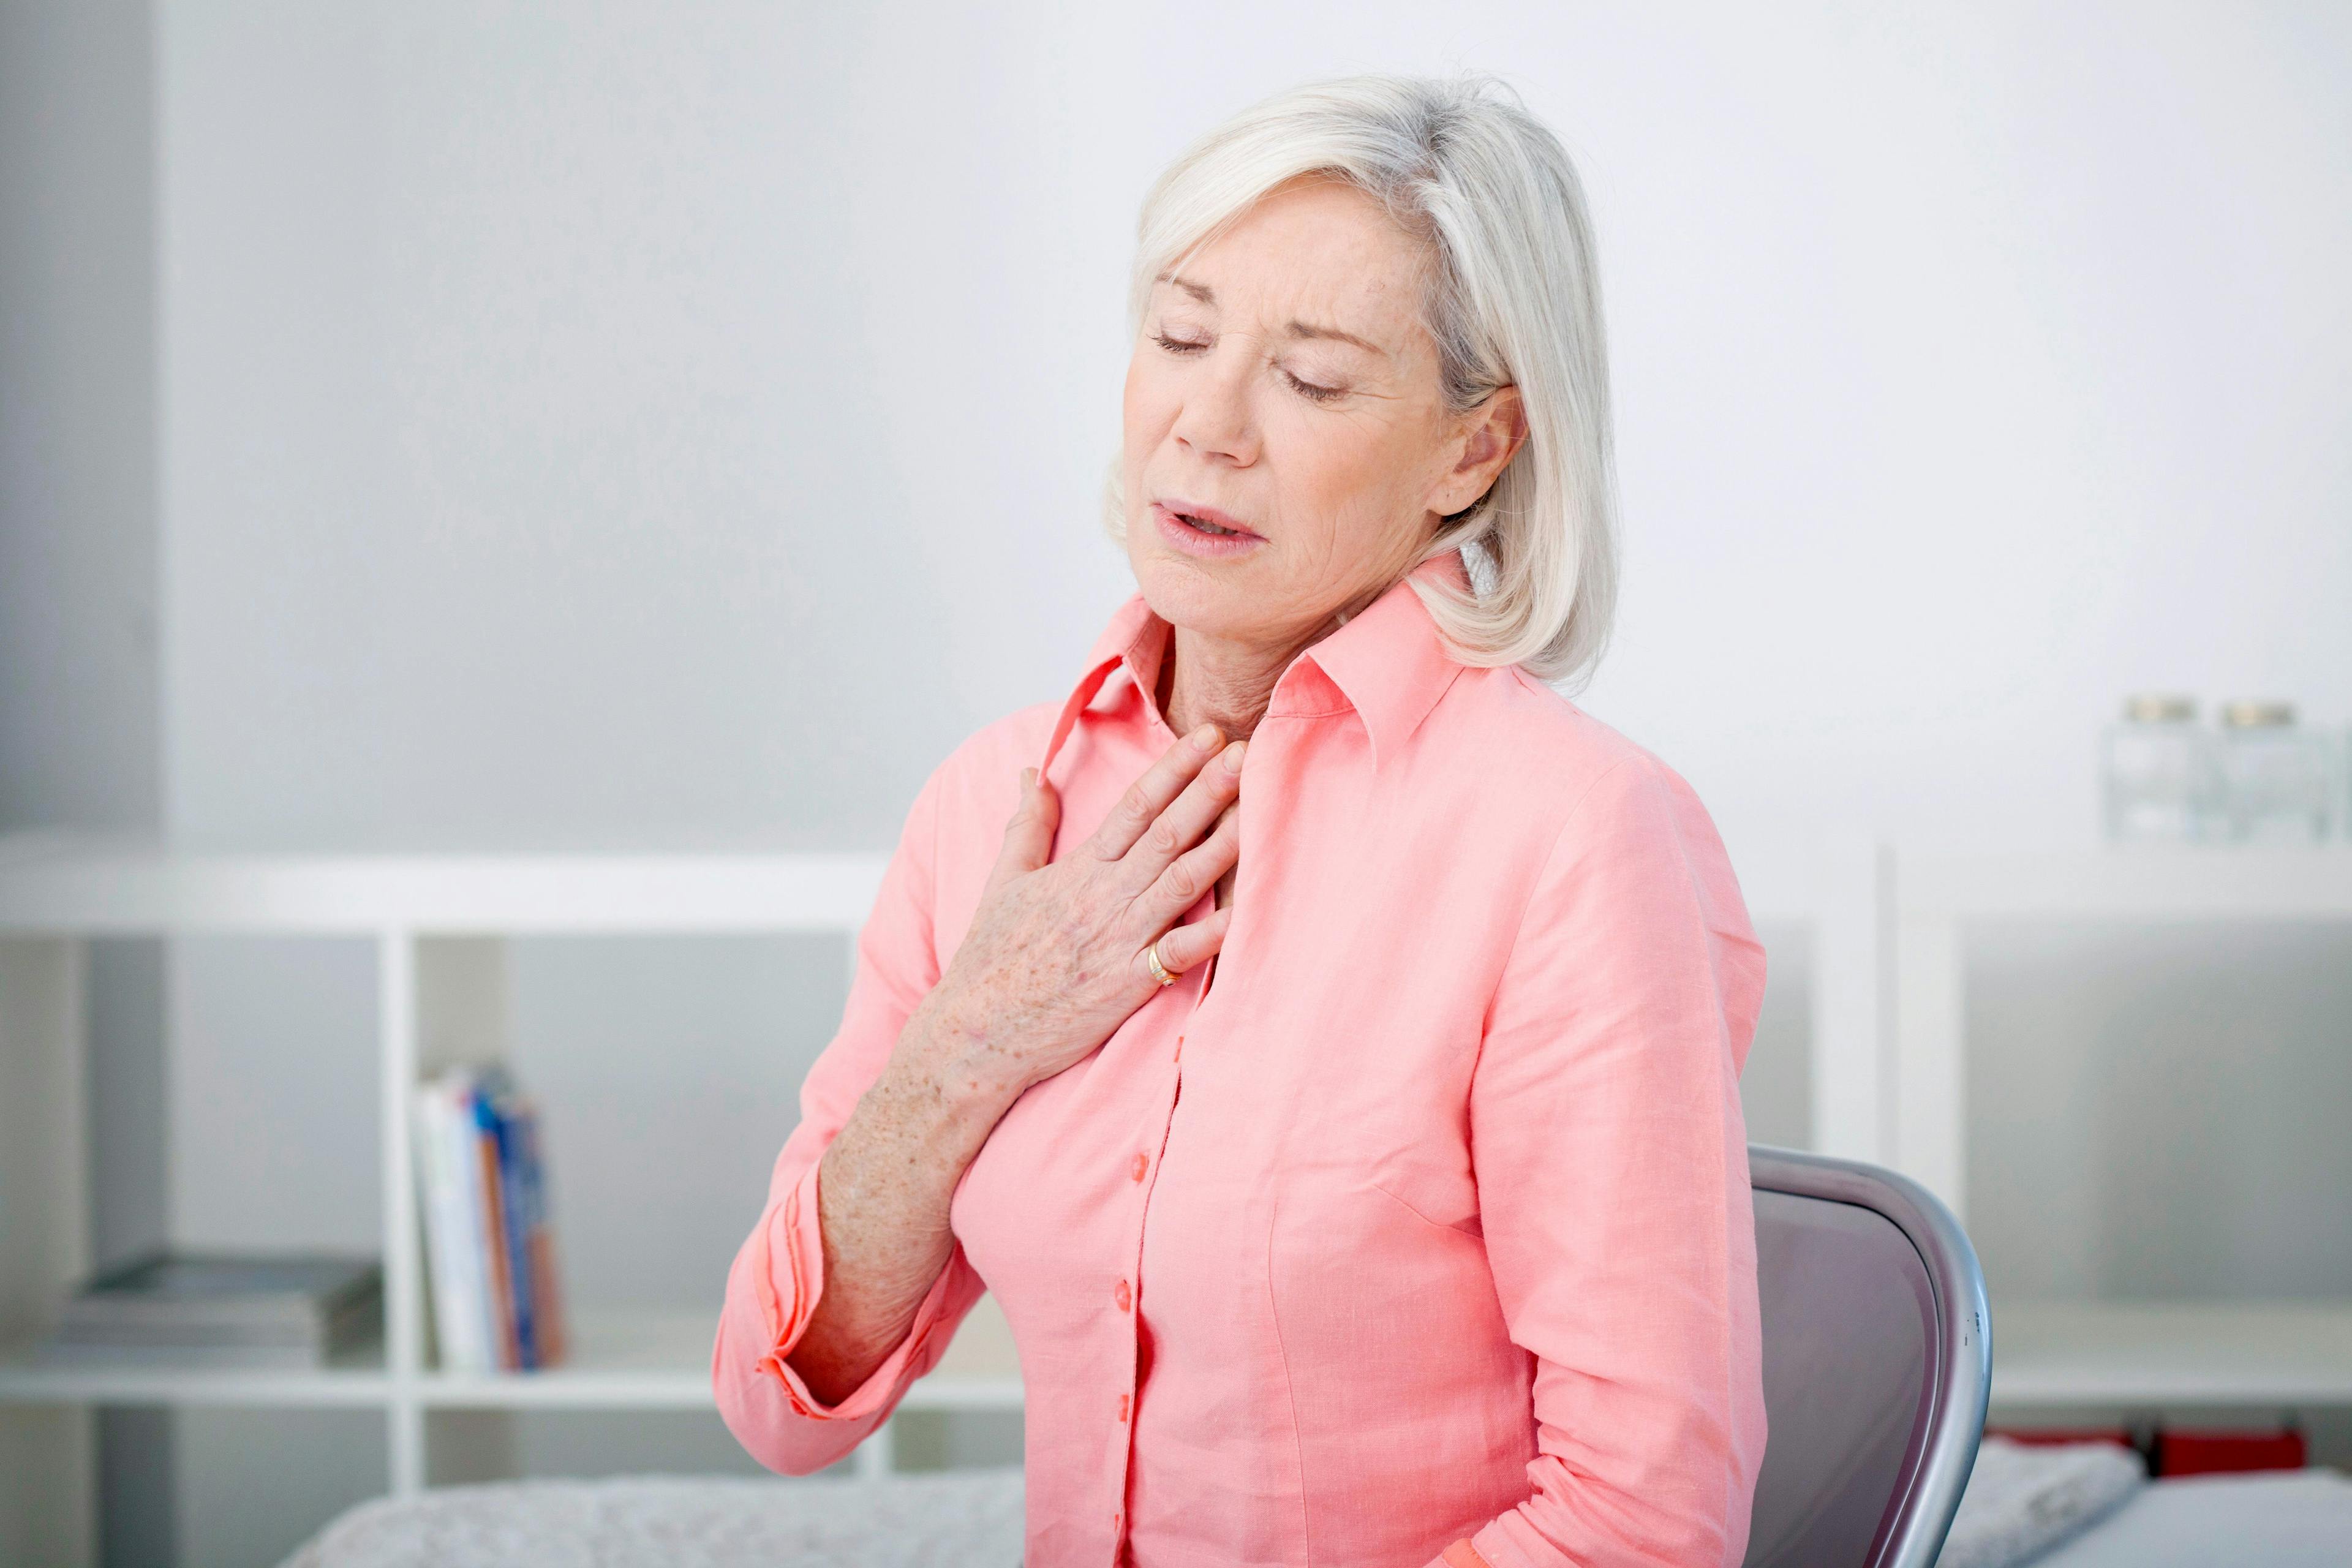 Patient with breathing difficulties | Image Credit: RFBSIP -stock.adobe.com